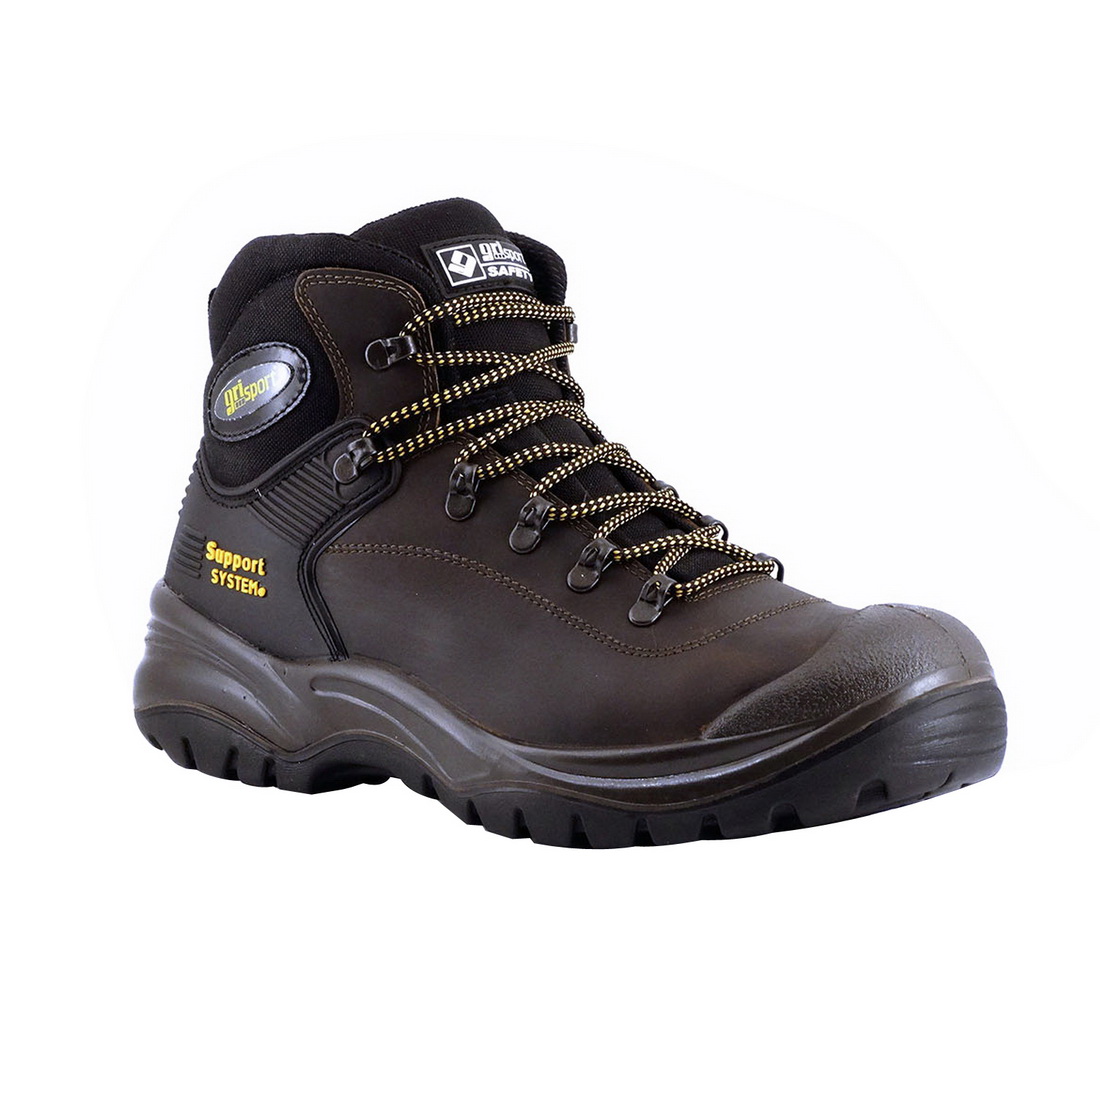 Contractor Safety Boot Size 10 Brown 